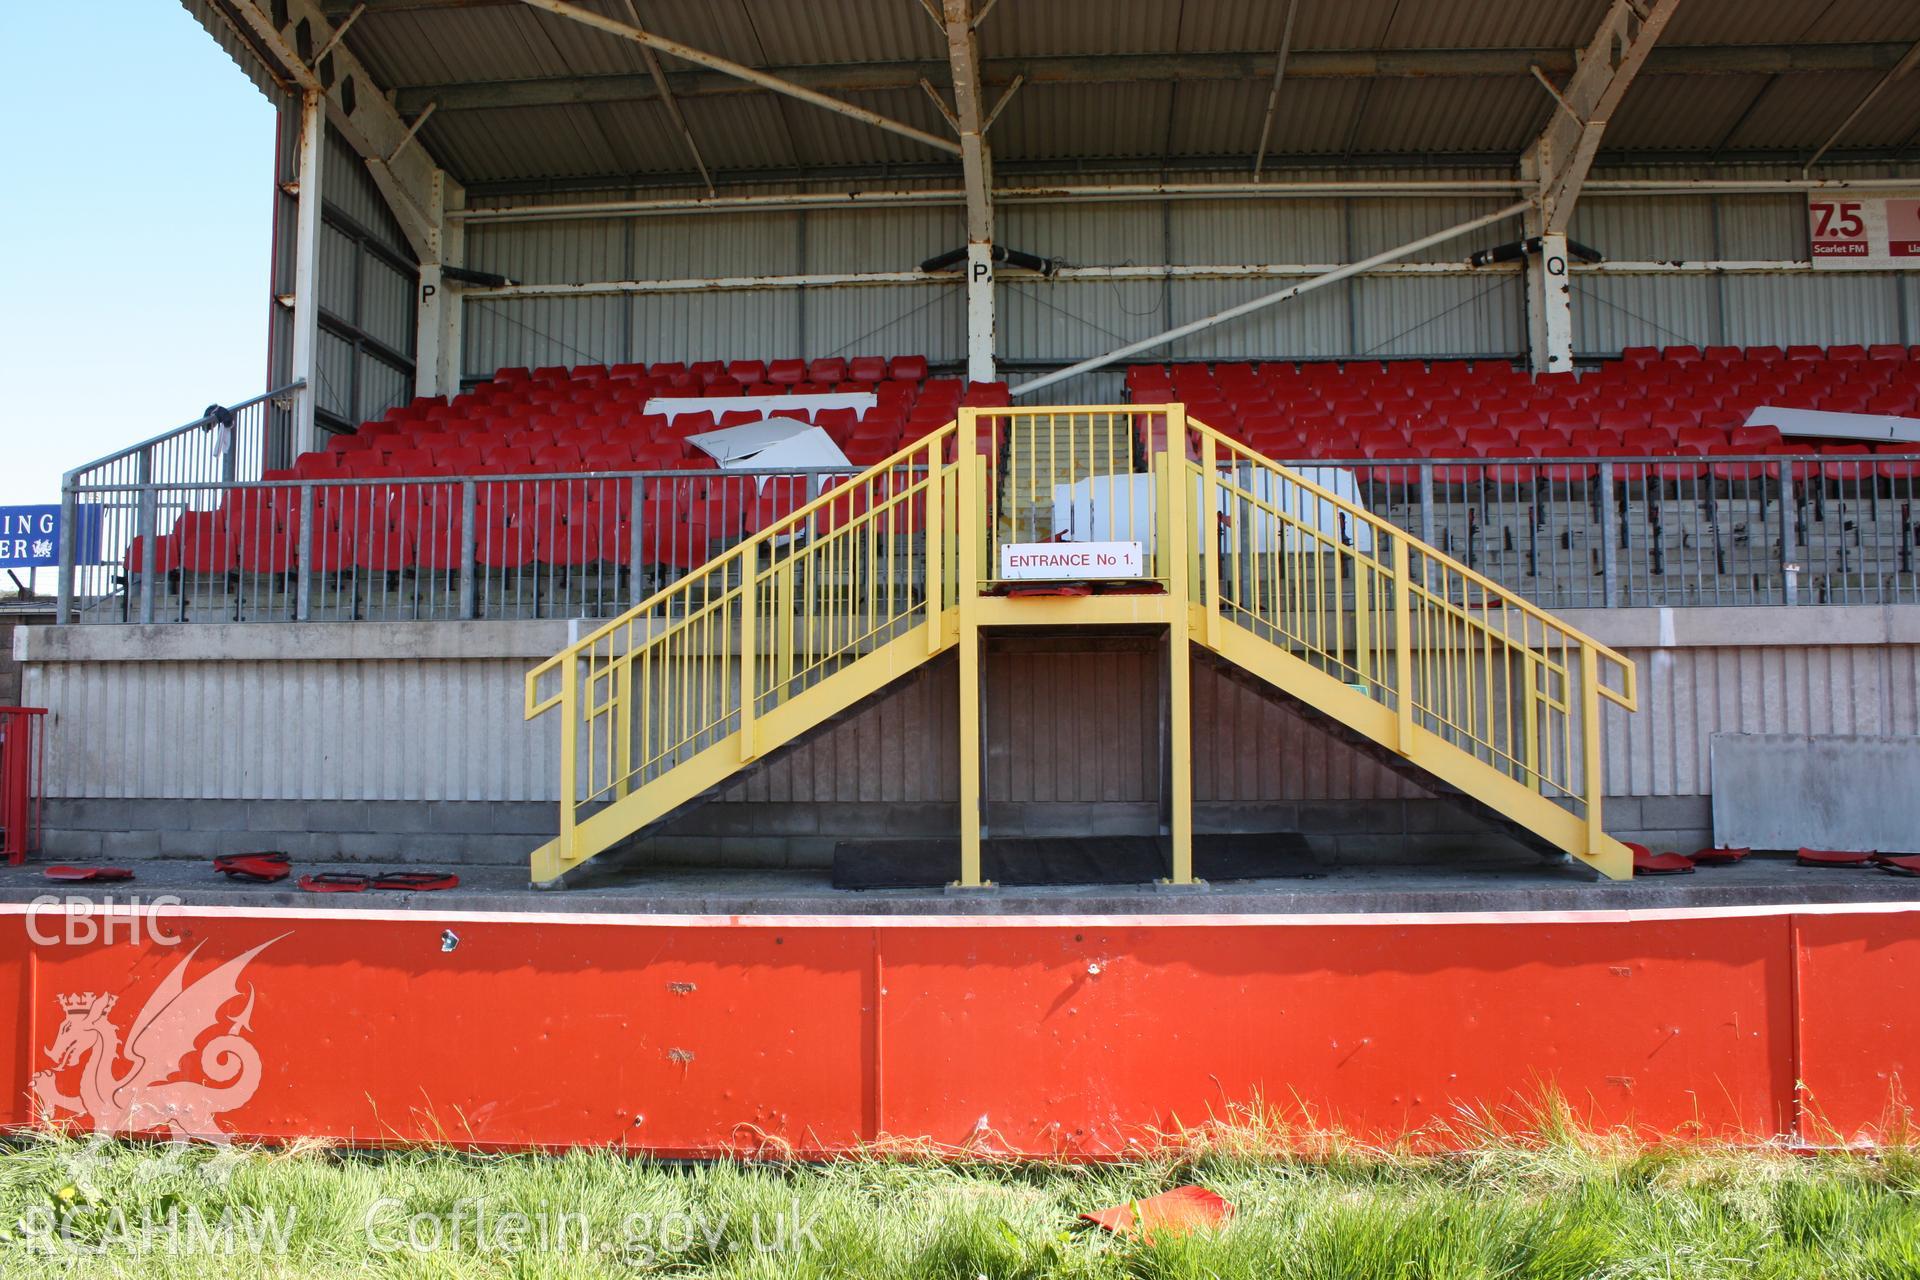 North Stand (west end), entrance No. 1 and stairs to upper level